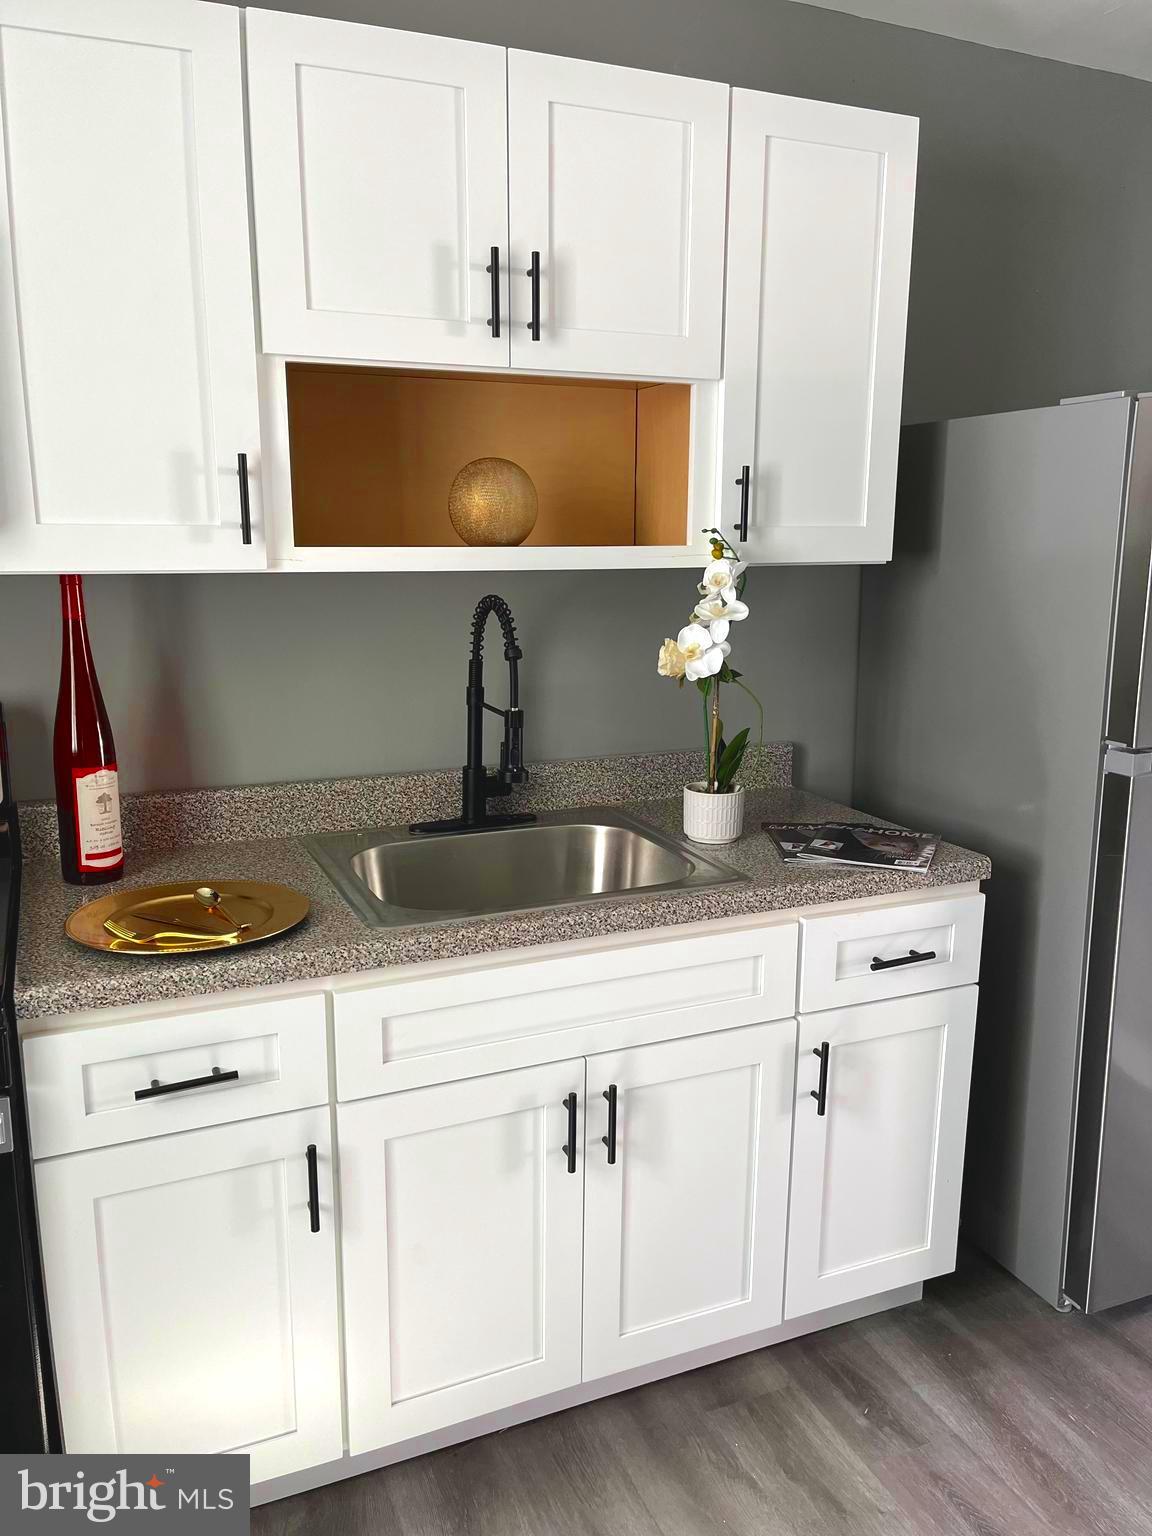 a kitchen with white cabinets appliances and sink